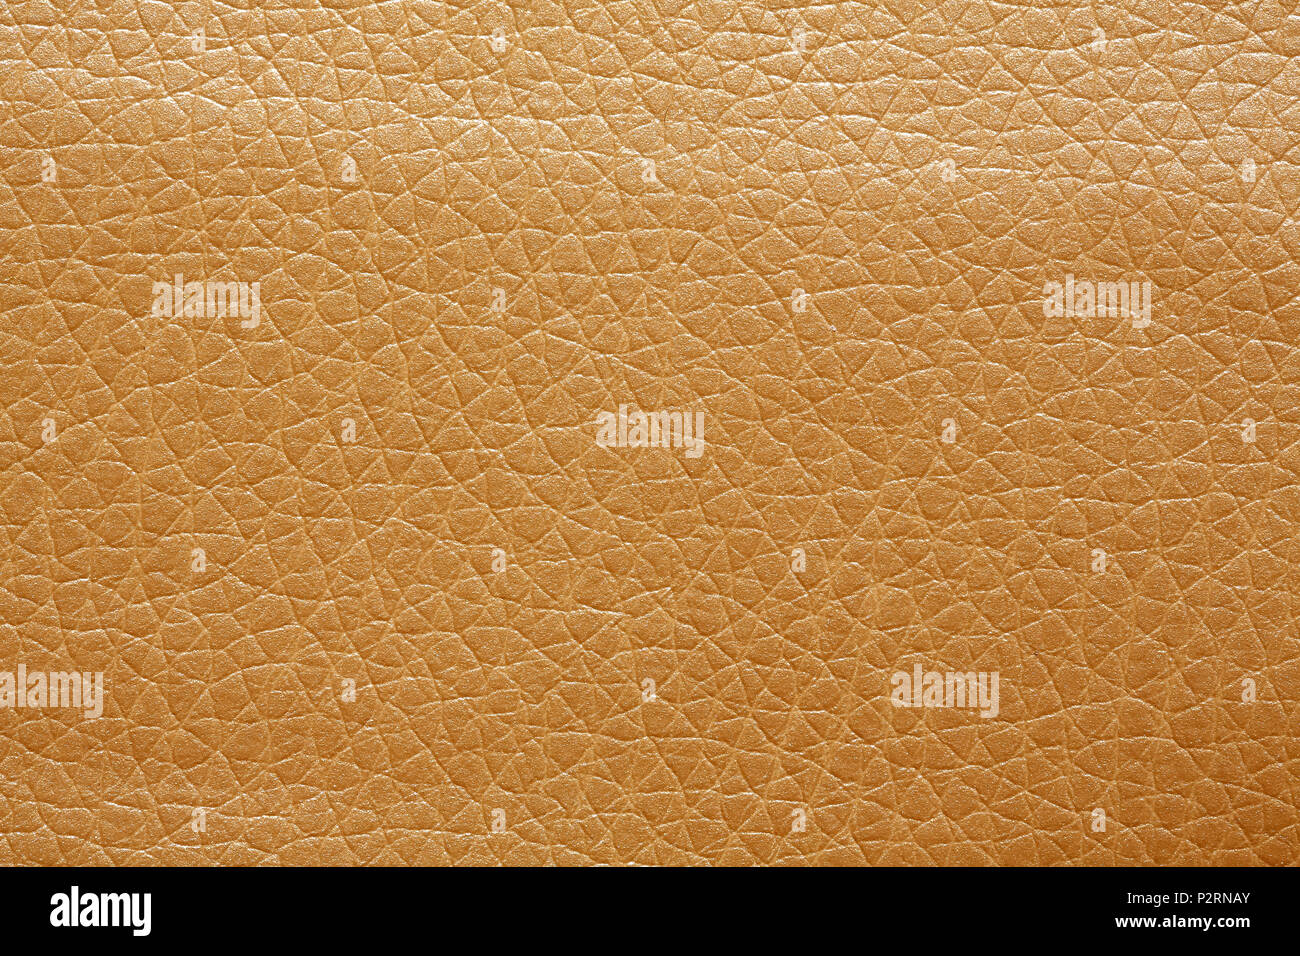 Leather texture in masterly brown tone. Stock Photo